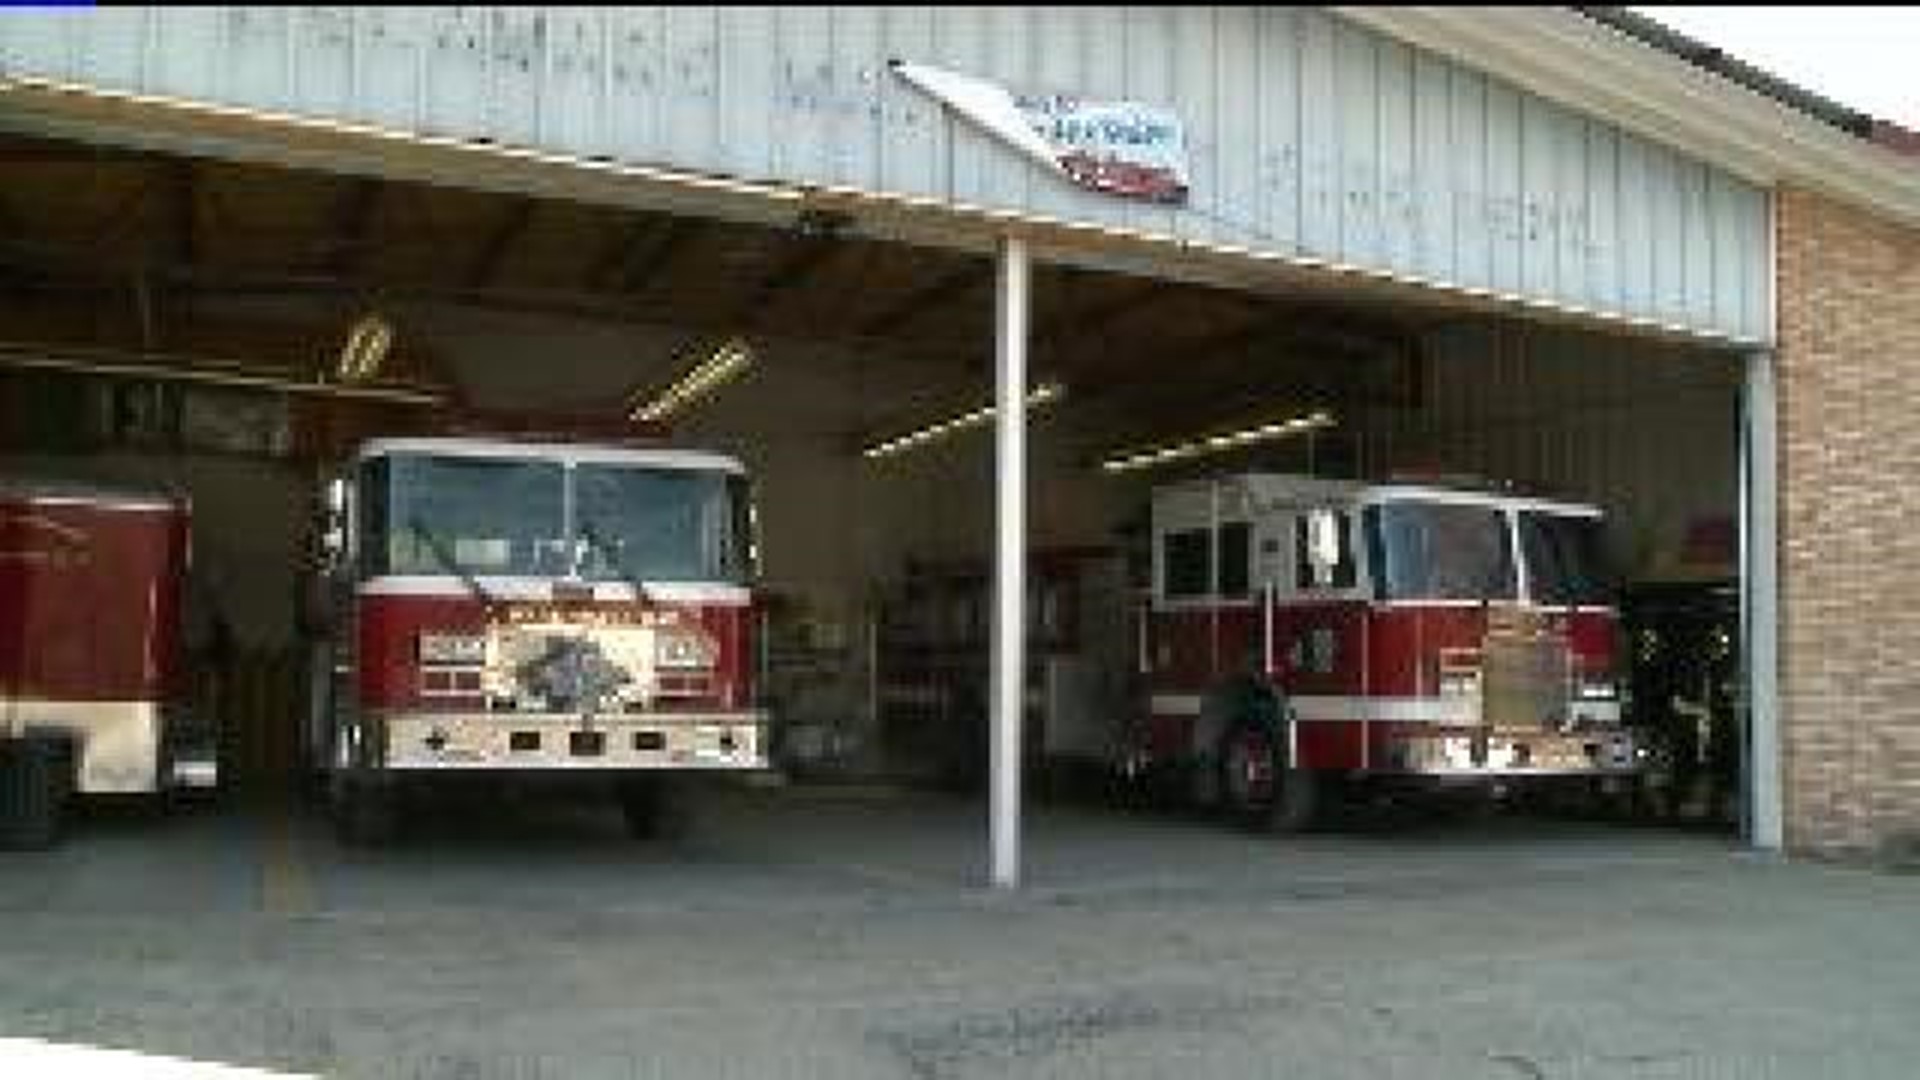 Volunteers Need Help To Fix Up Fire House